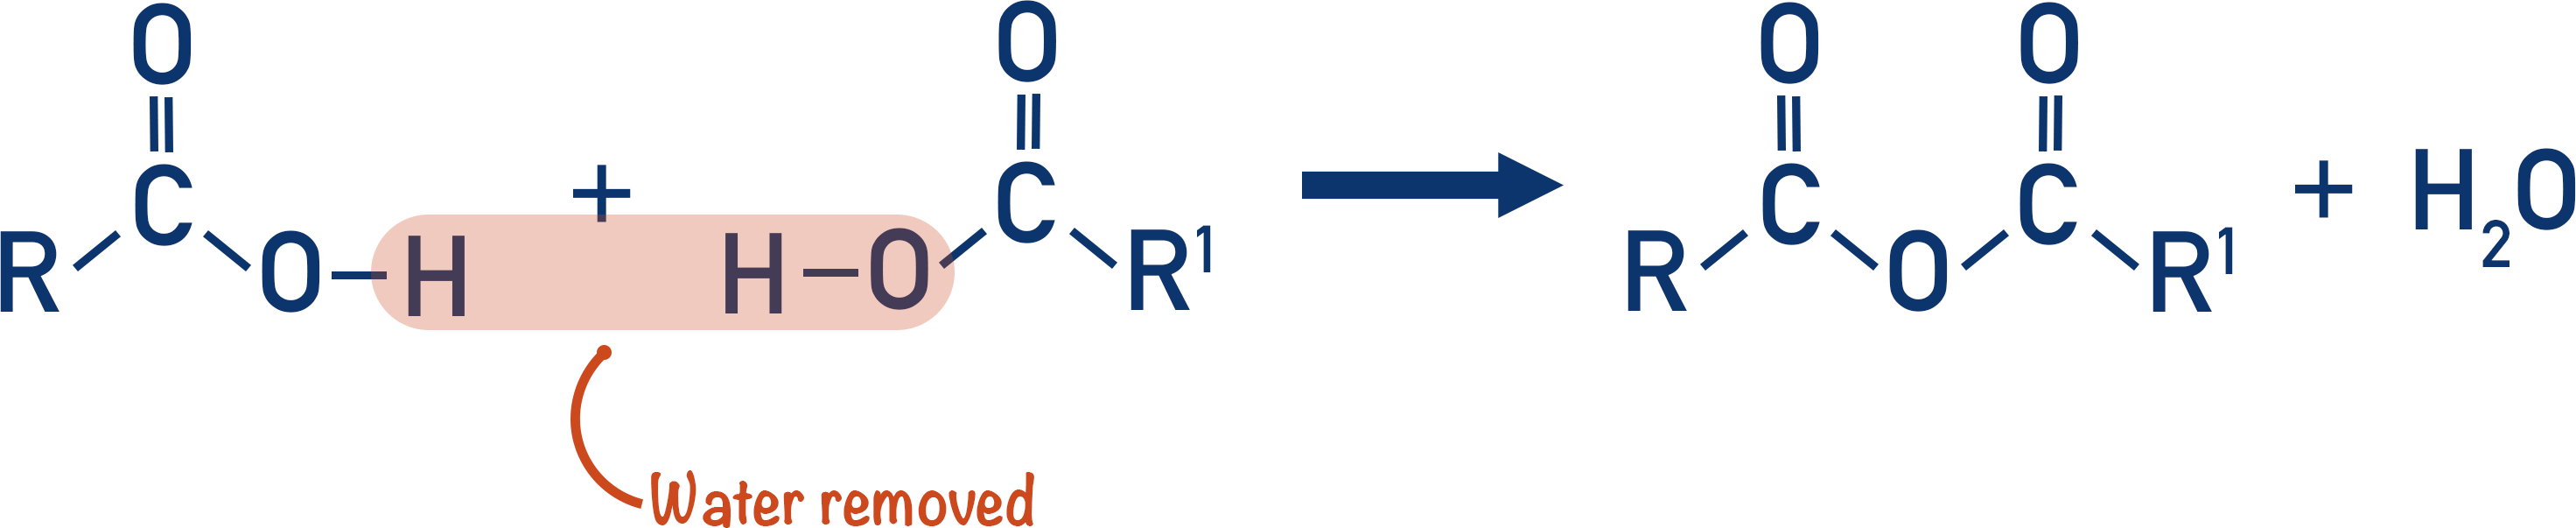 reaction between carboxylic acids to form acid anhydride and water